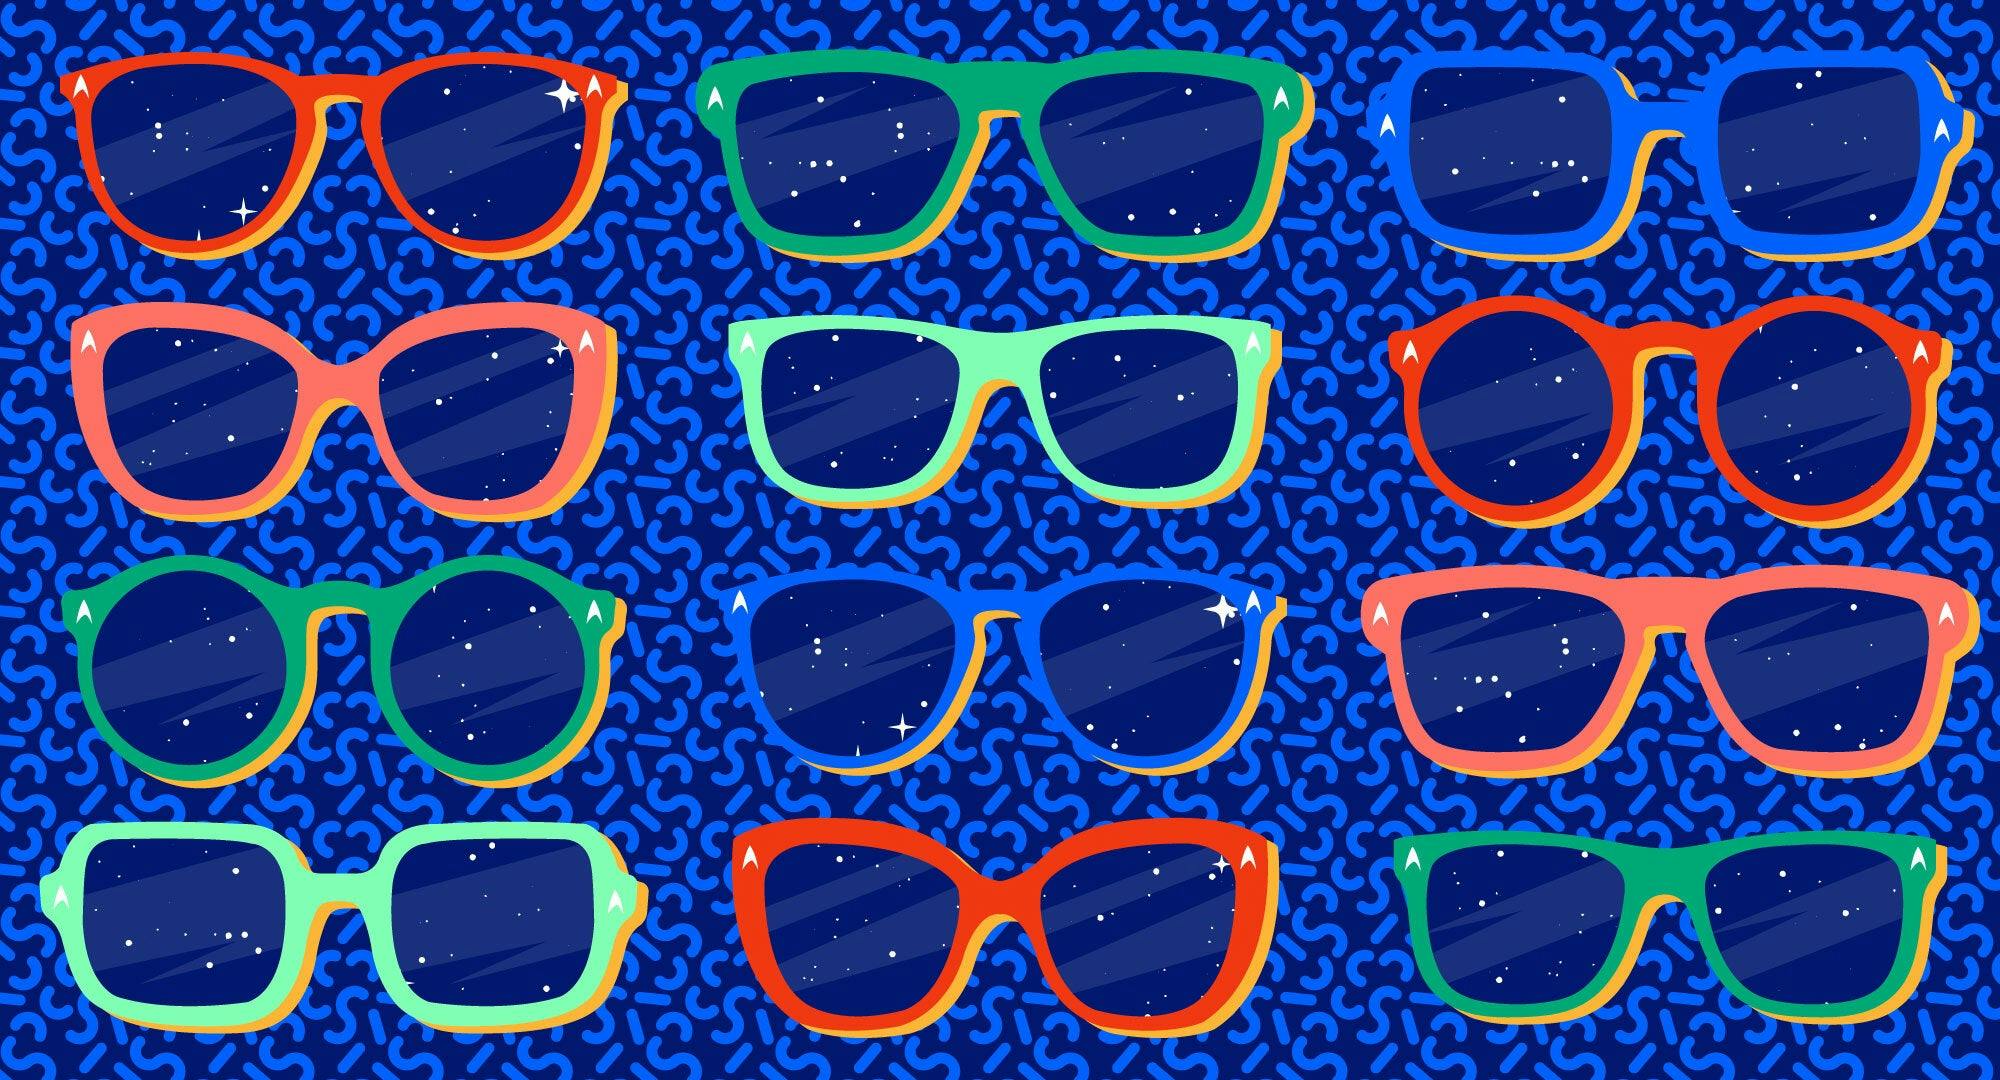 Illustrated banner featuring various designs of sunglasses